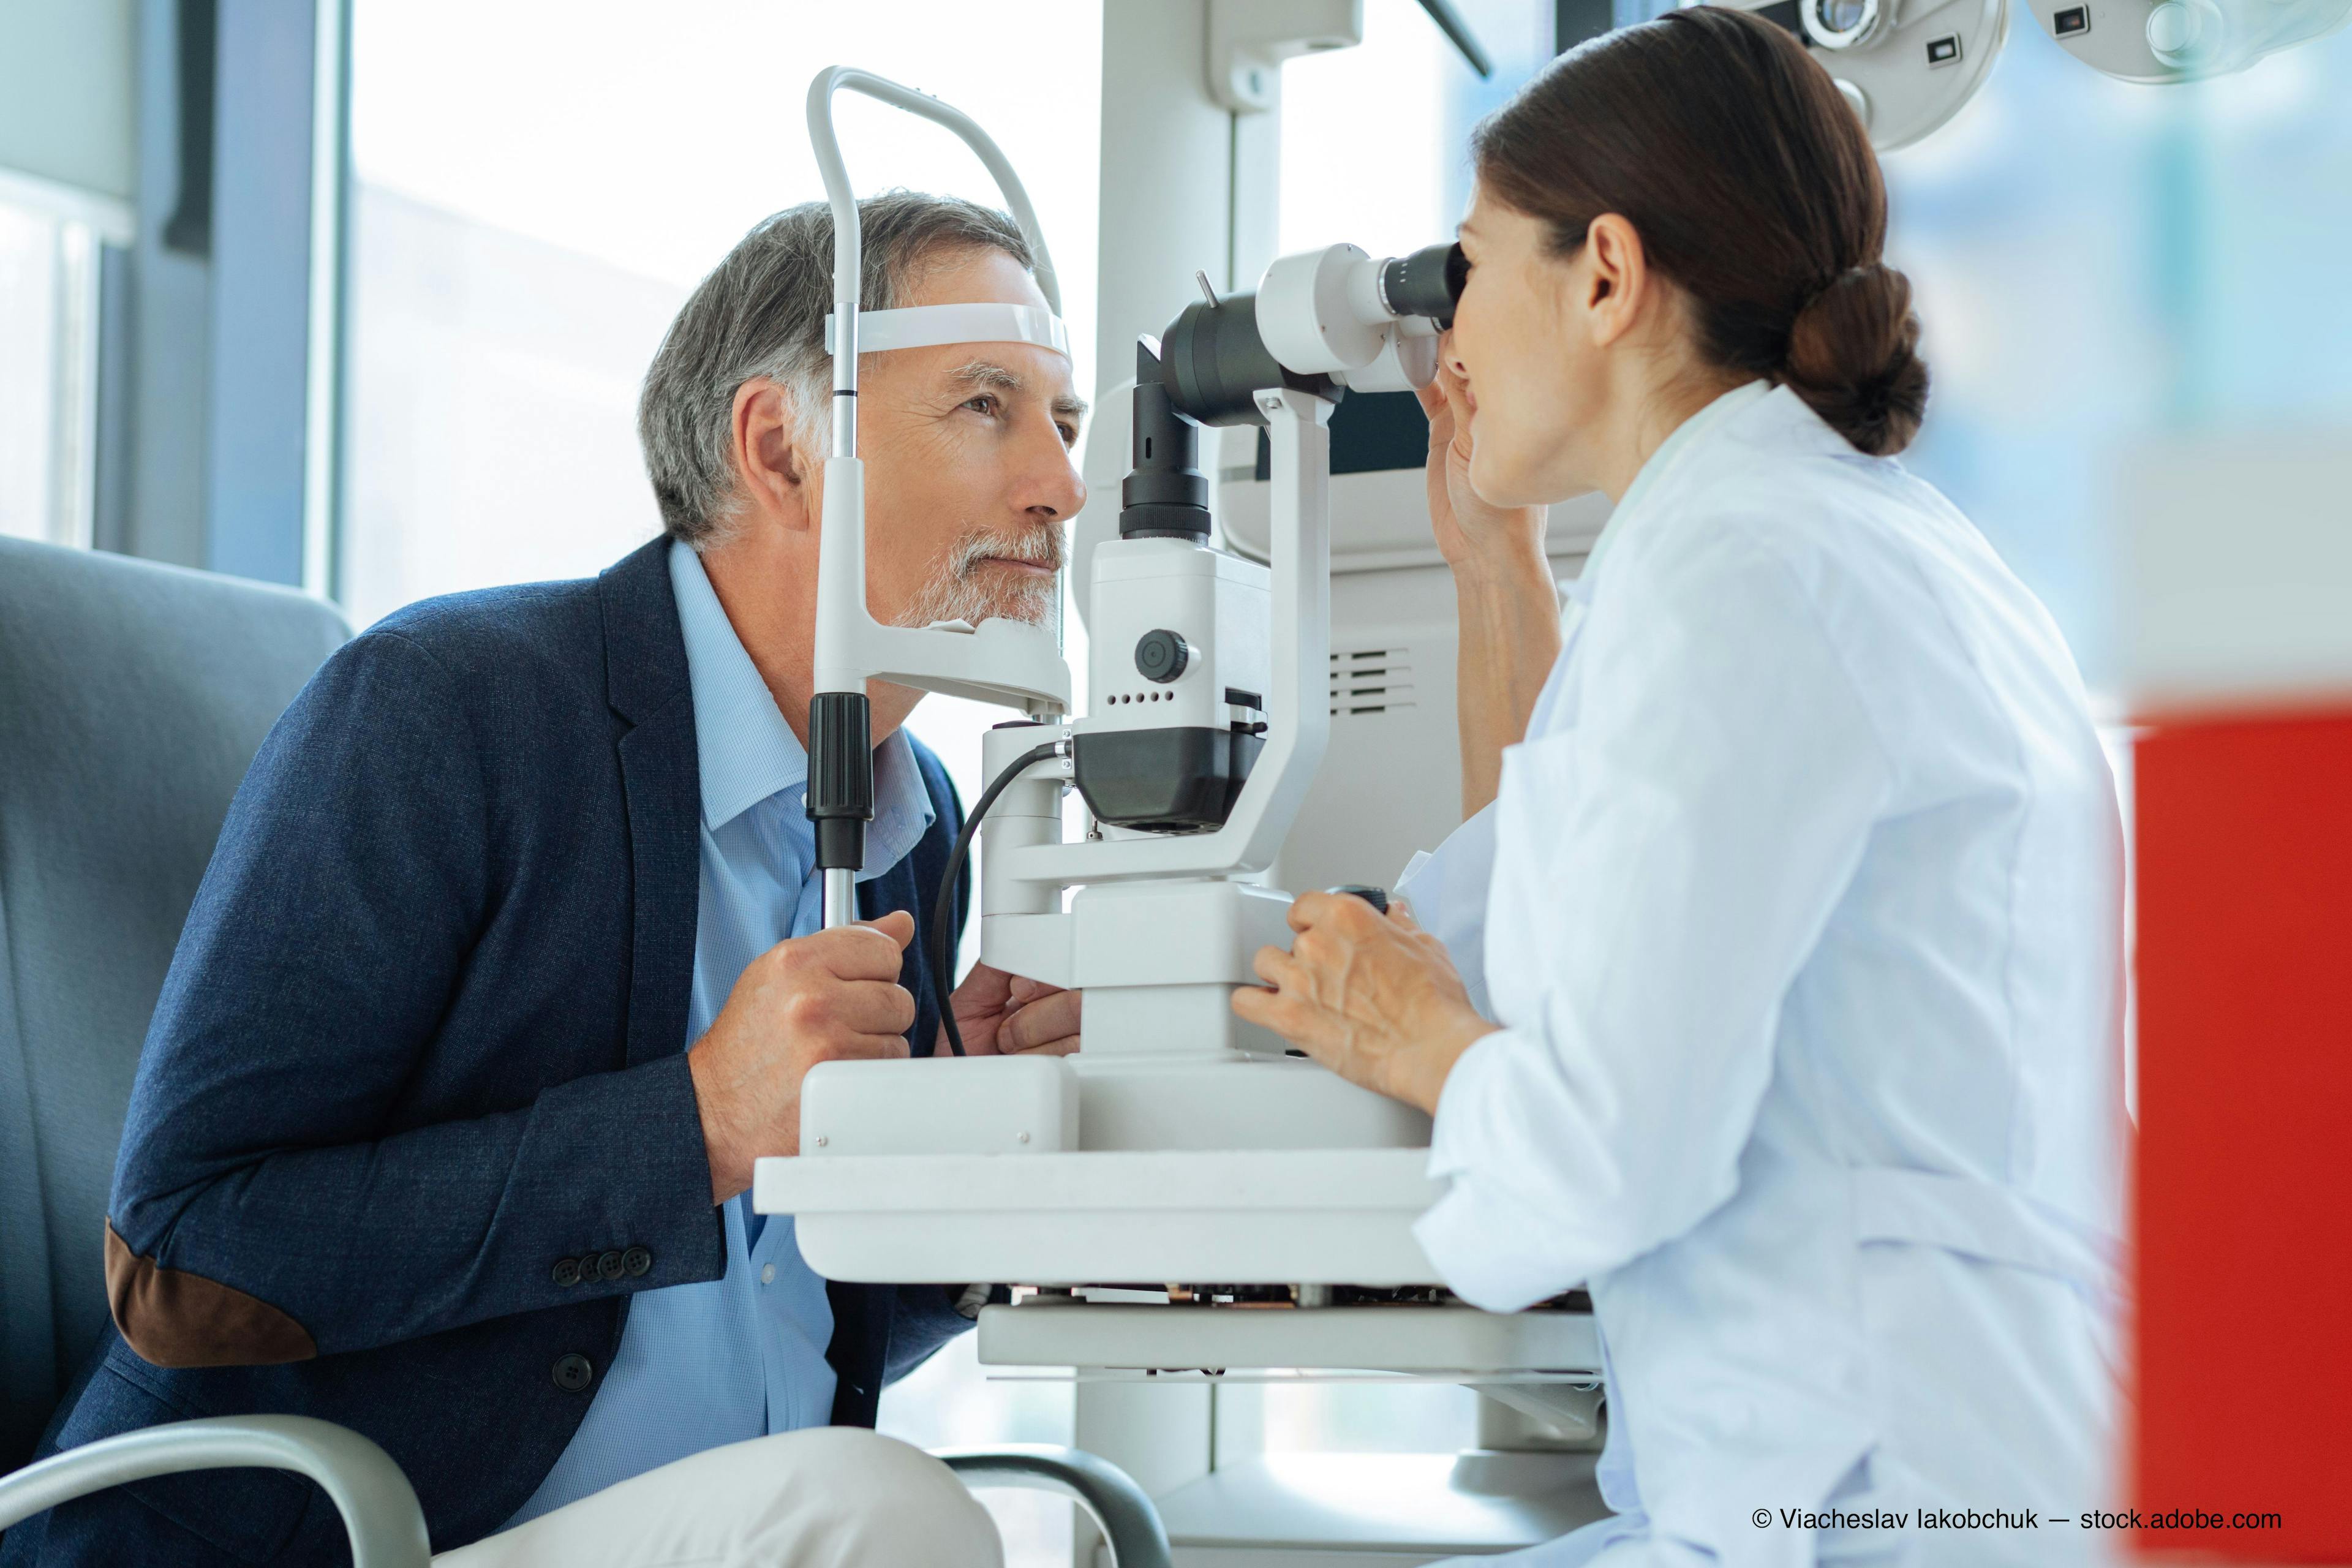 Trigger found for inflammation in lupus, macular degeneration